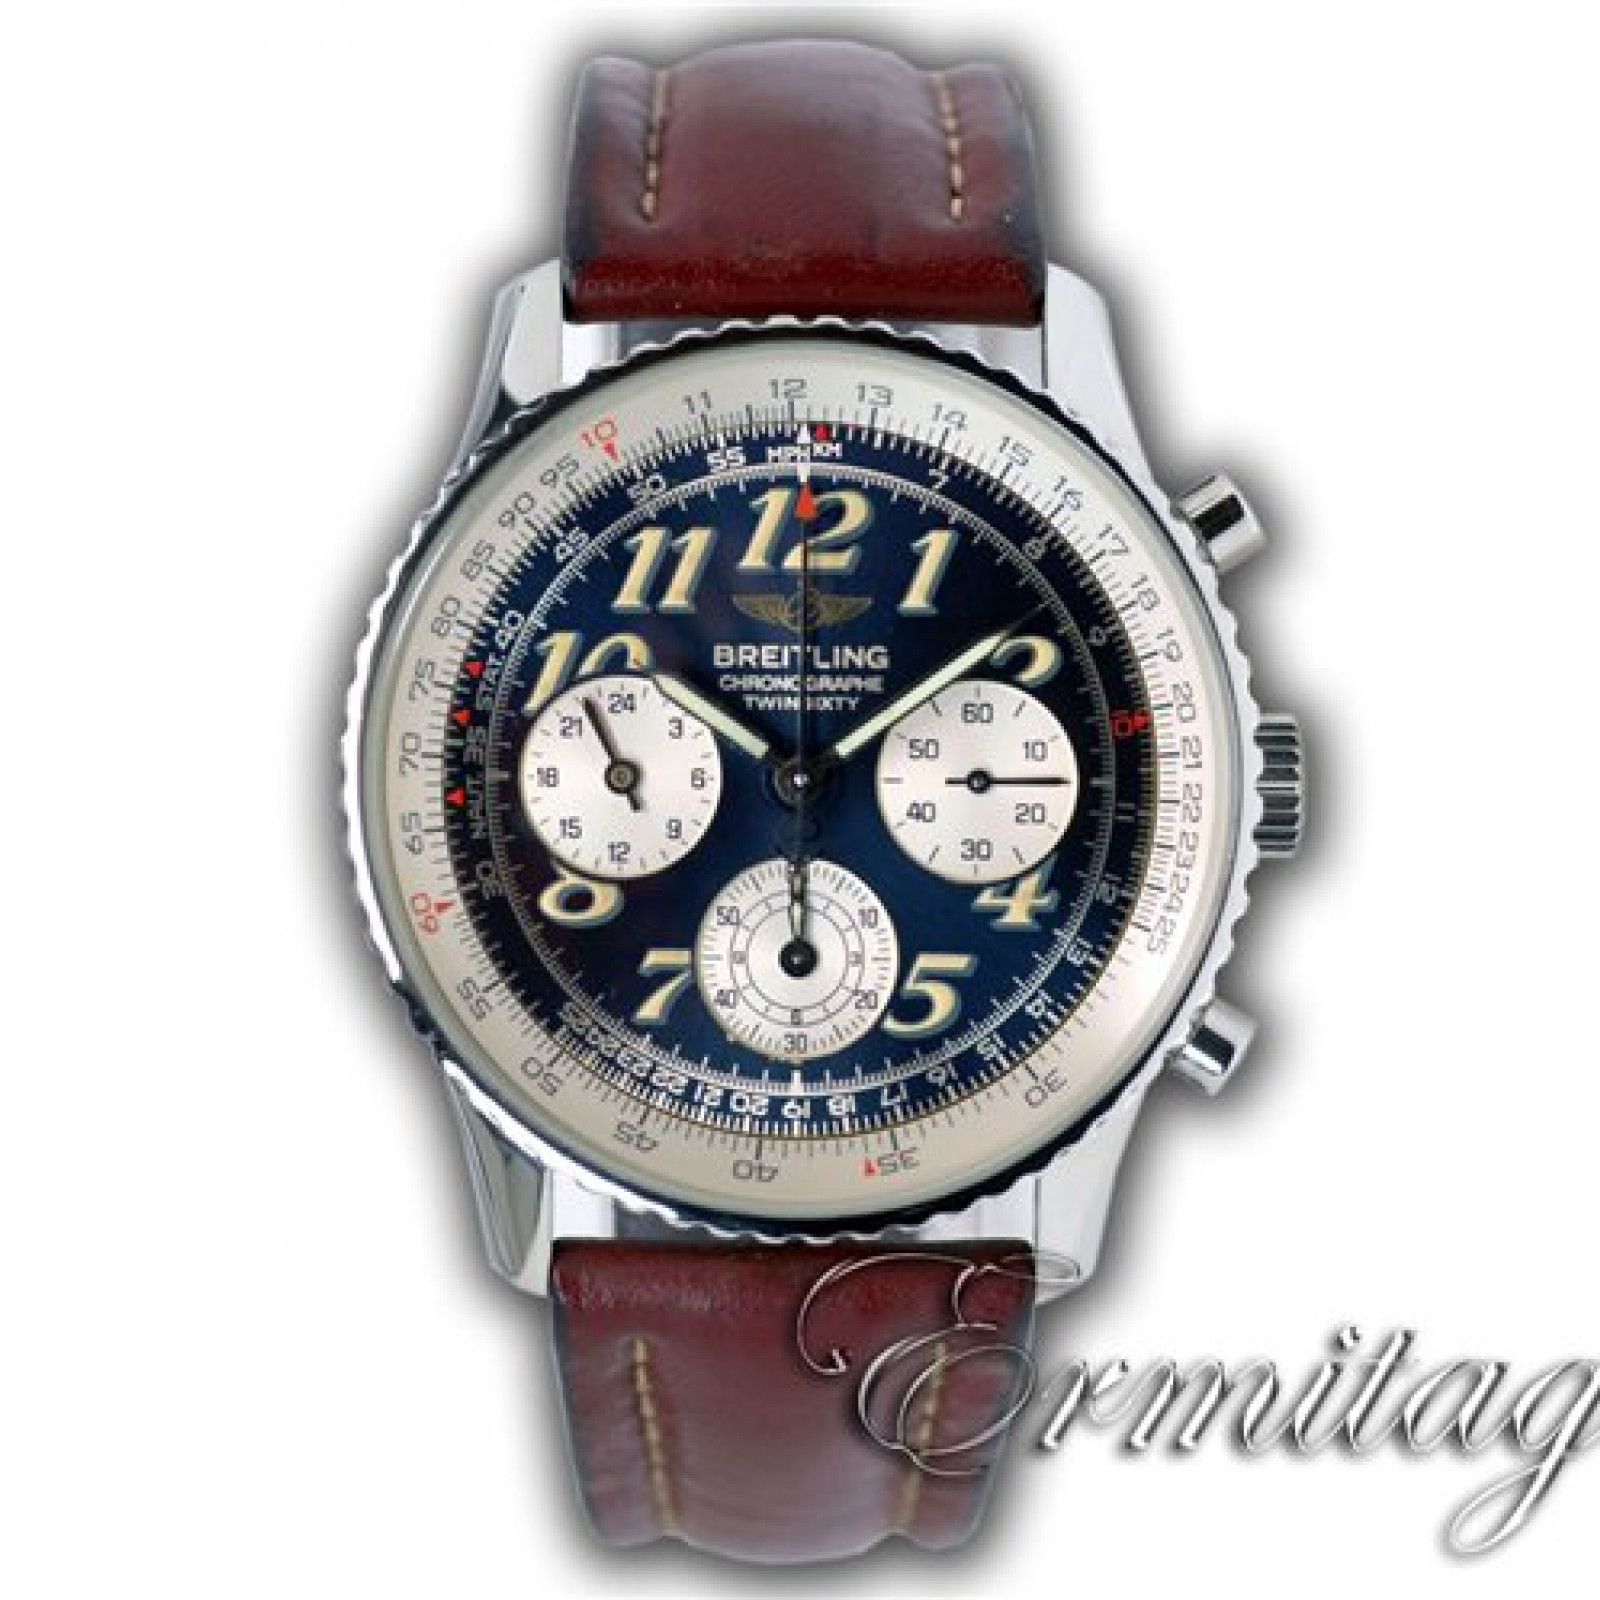 Breitling Navitimer Twin-sixty 2 A39022.1 Steel